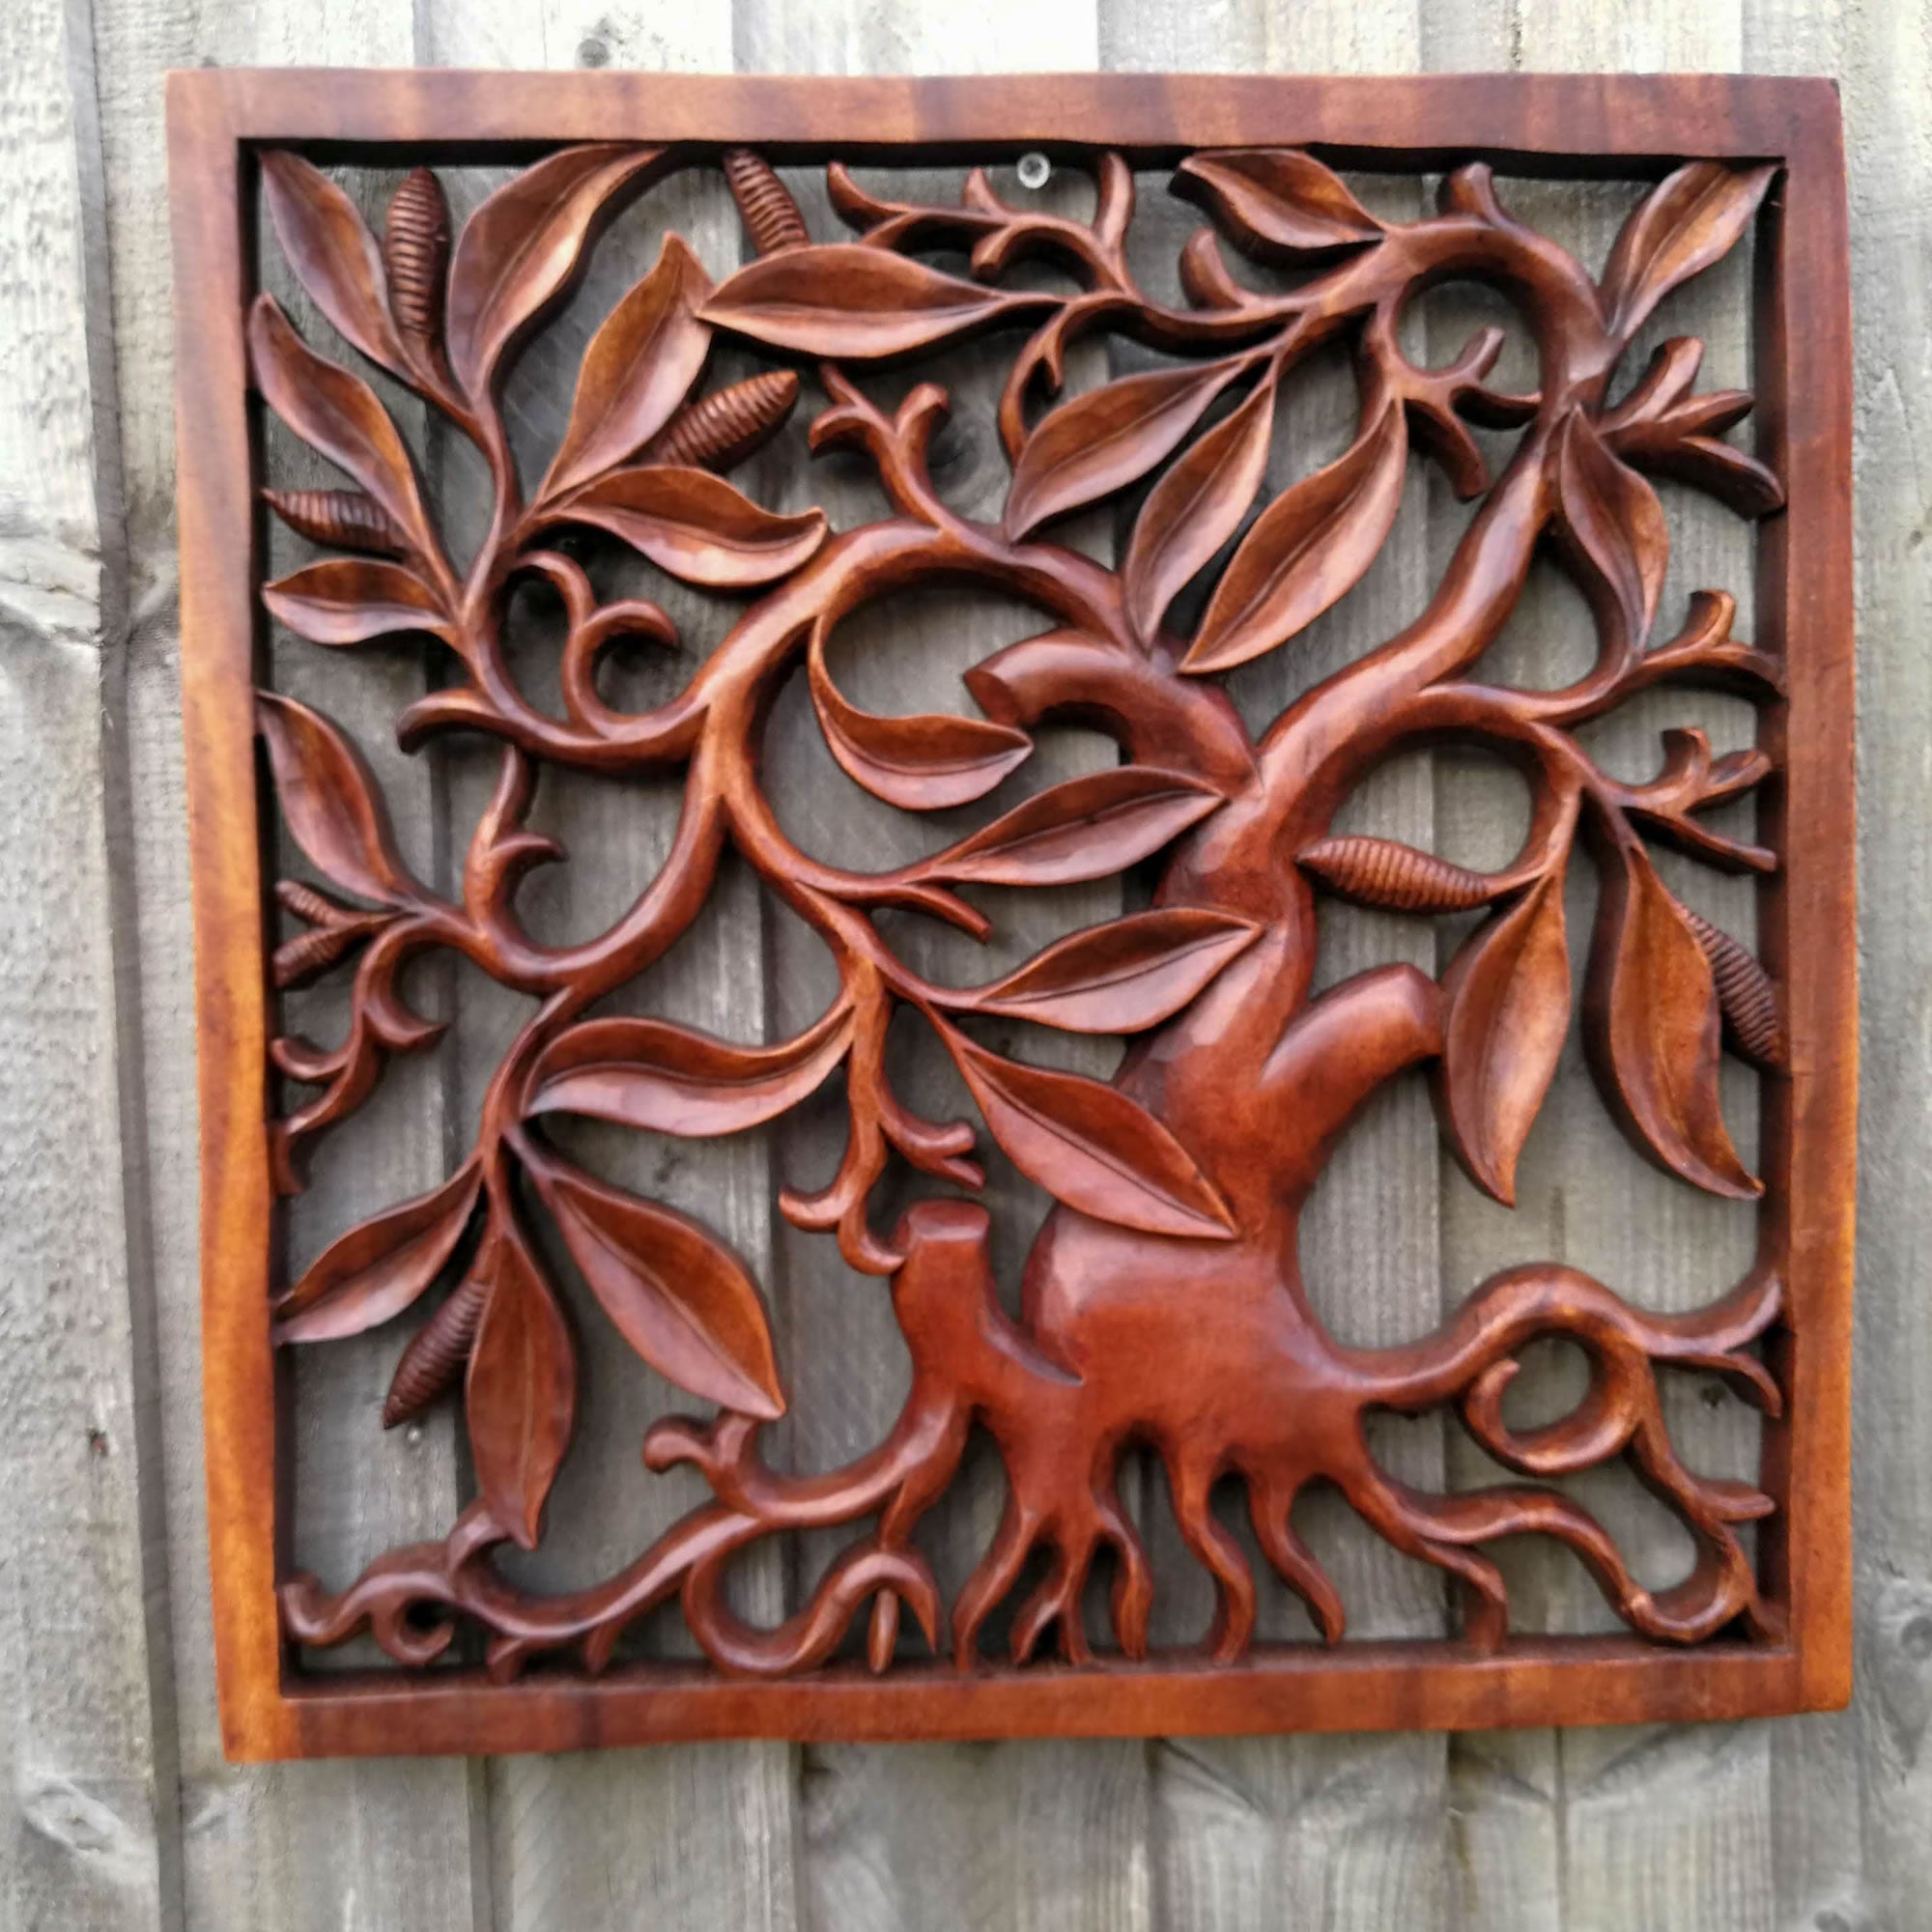 Hand Carved Wooden Decorative Panel Art Sculpture Tree of Fortune